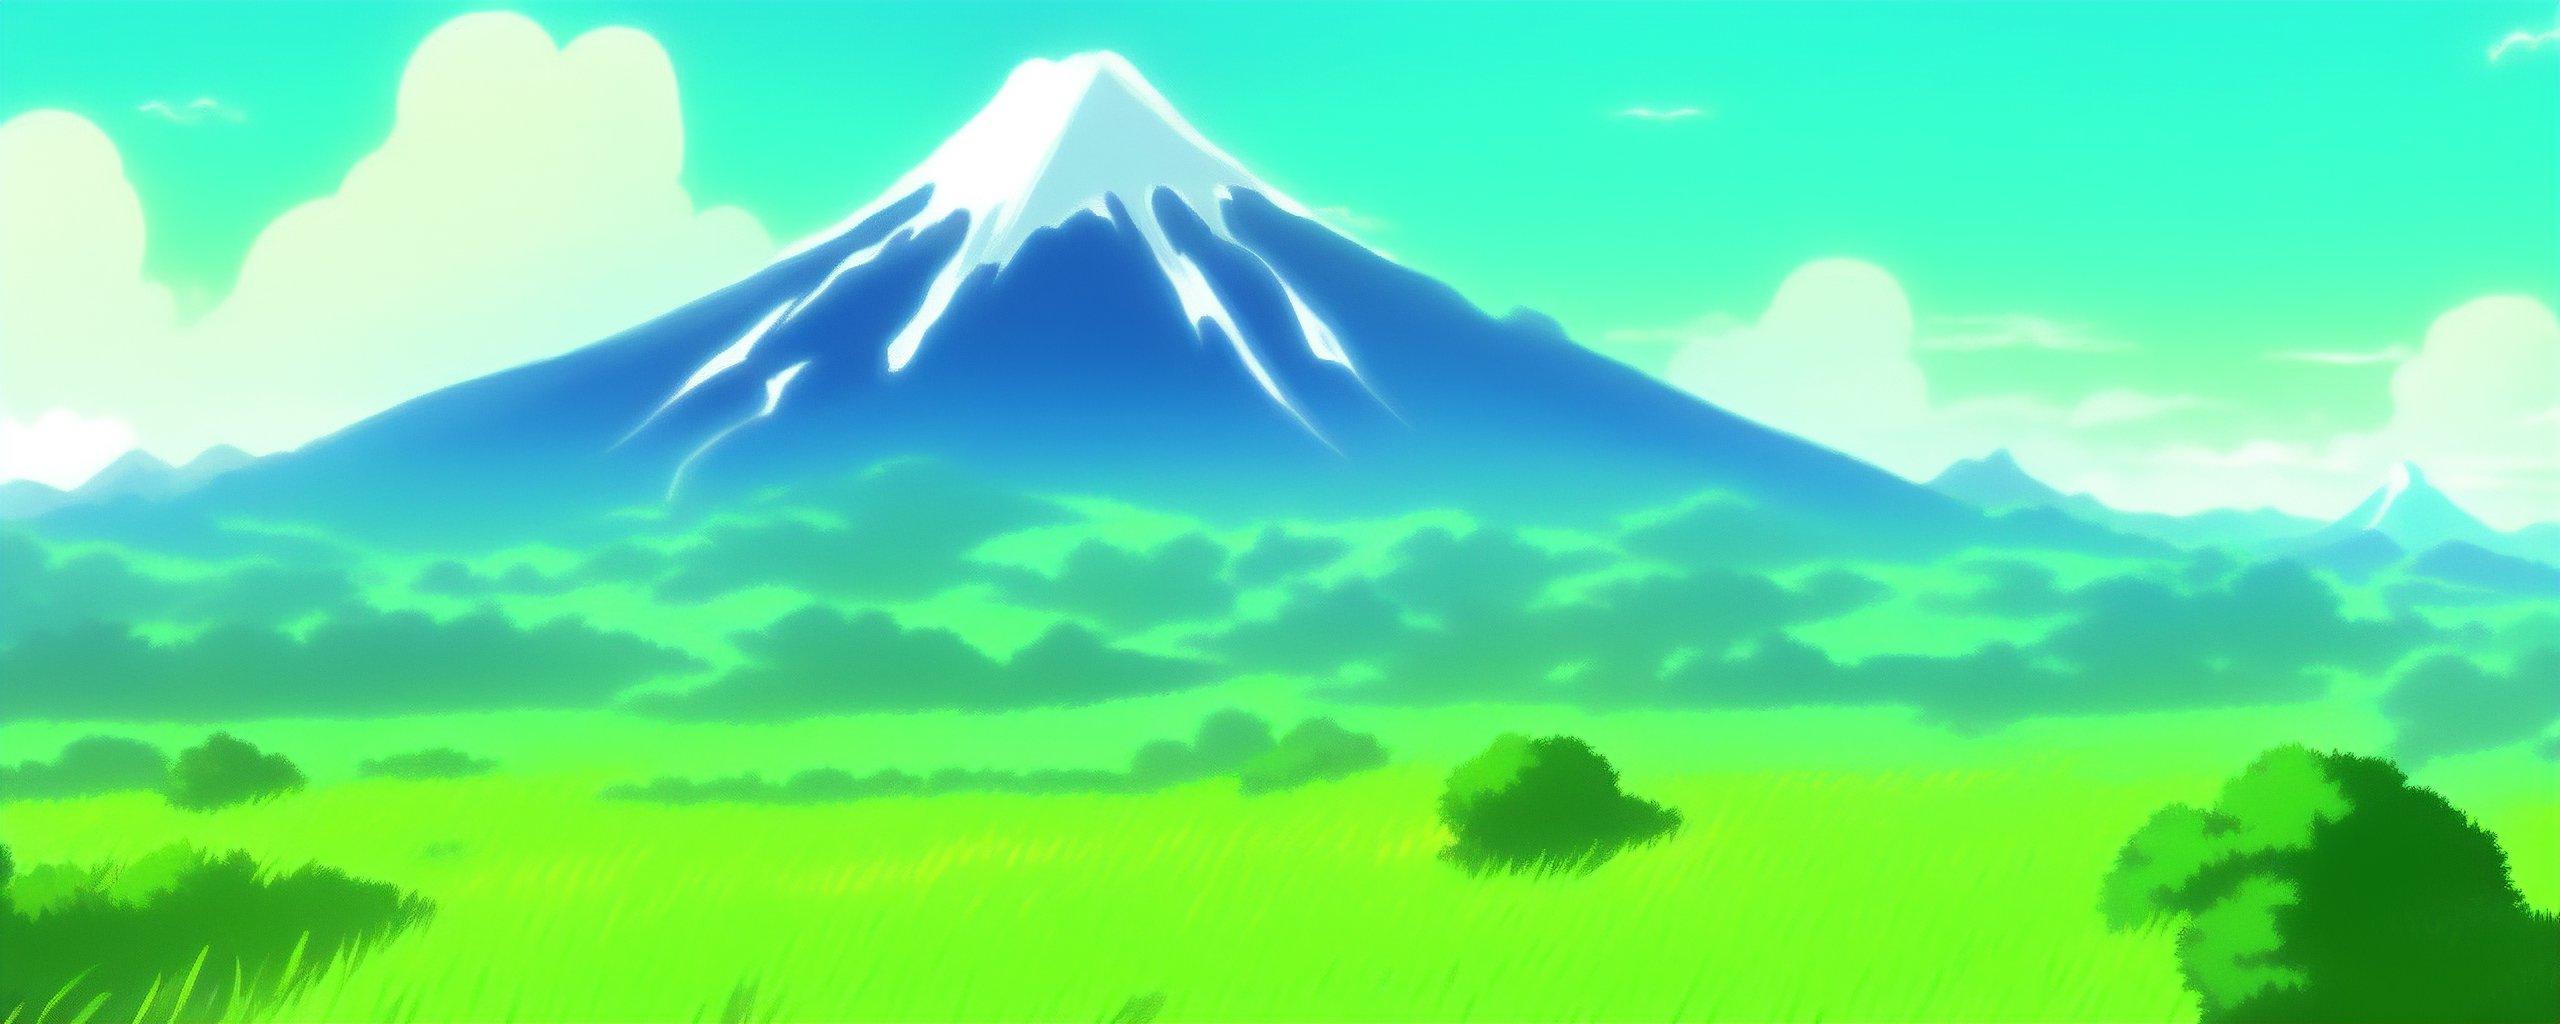 An image of a rolling green landscape by makoto shinkai, breath of the wild, active volcano, windows xp bliss, manga style, ((thick outlines))